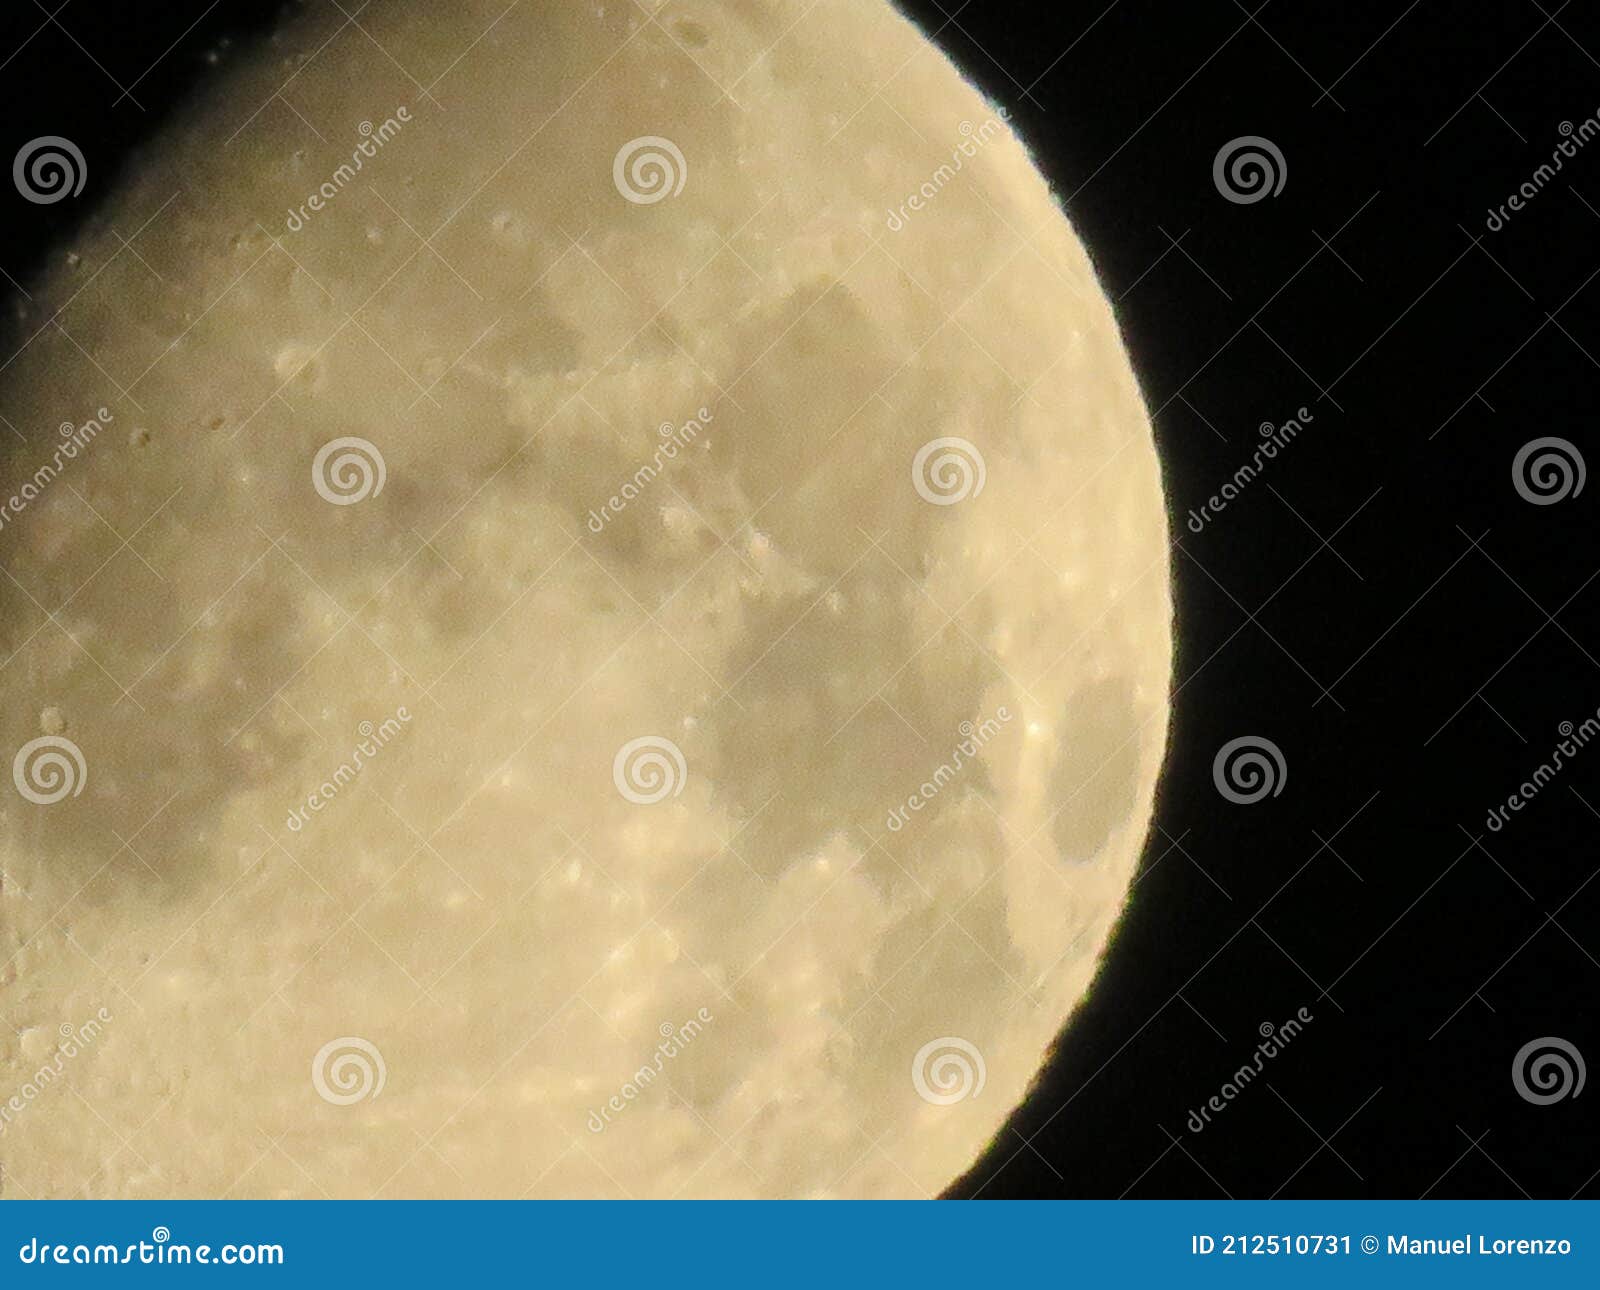 moon space satellite sky night growing earth craters